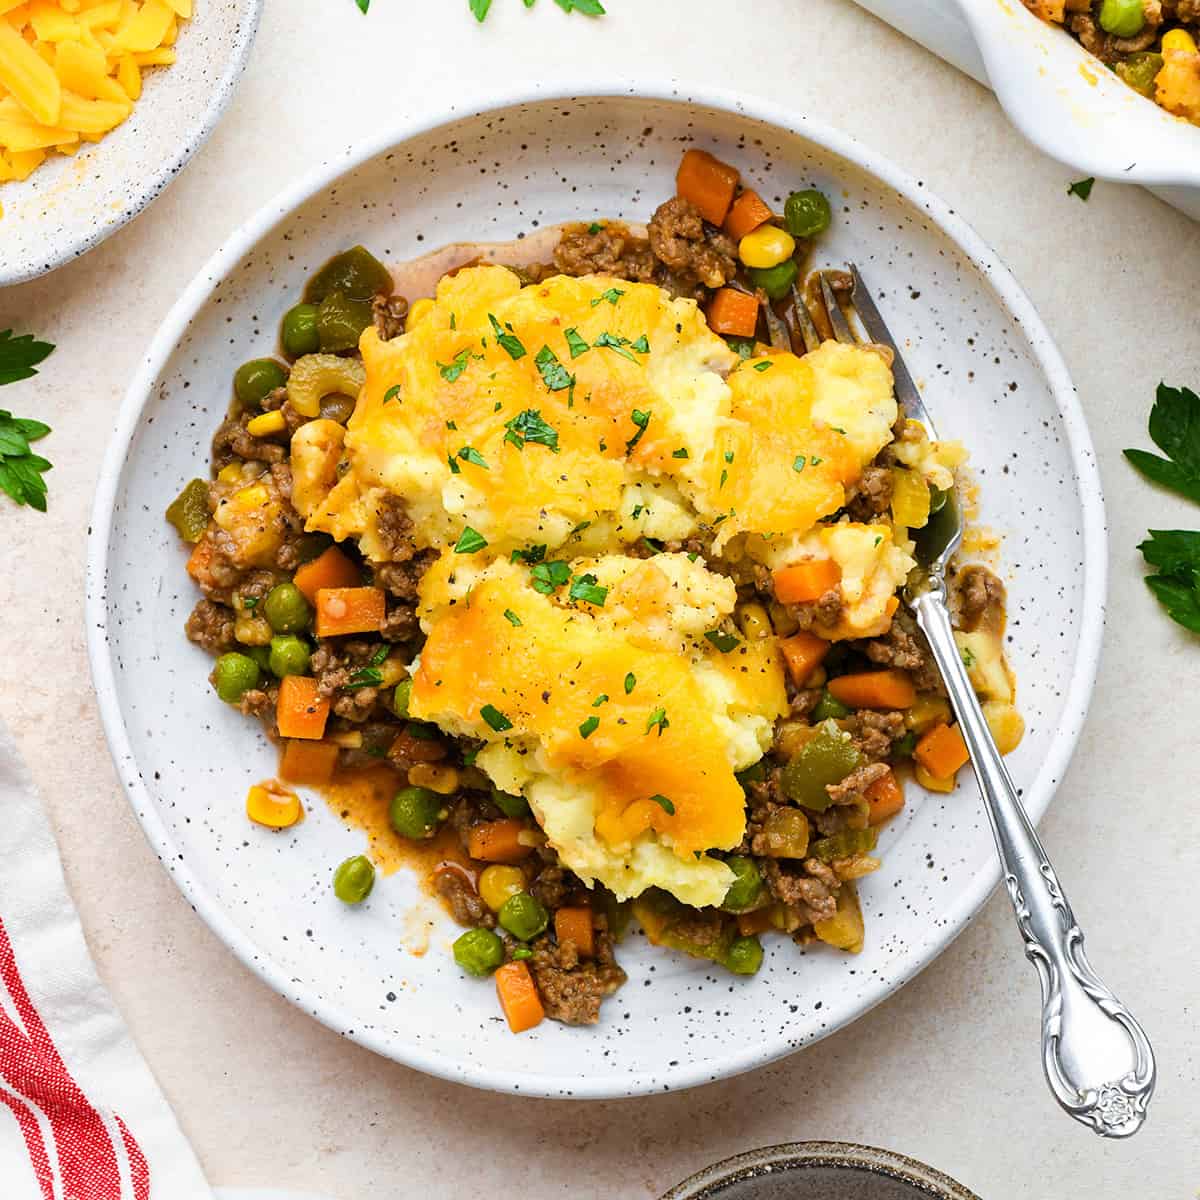 Shepherd's Pie on a plate with a fork